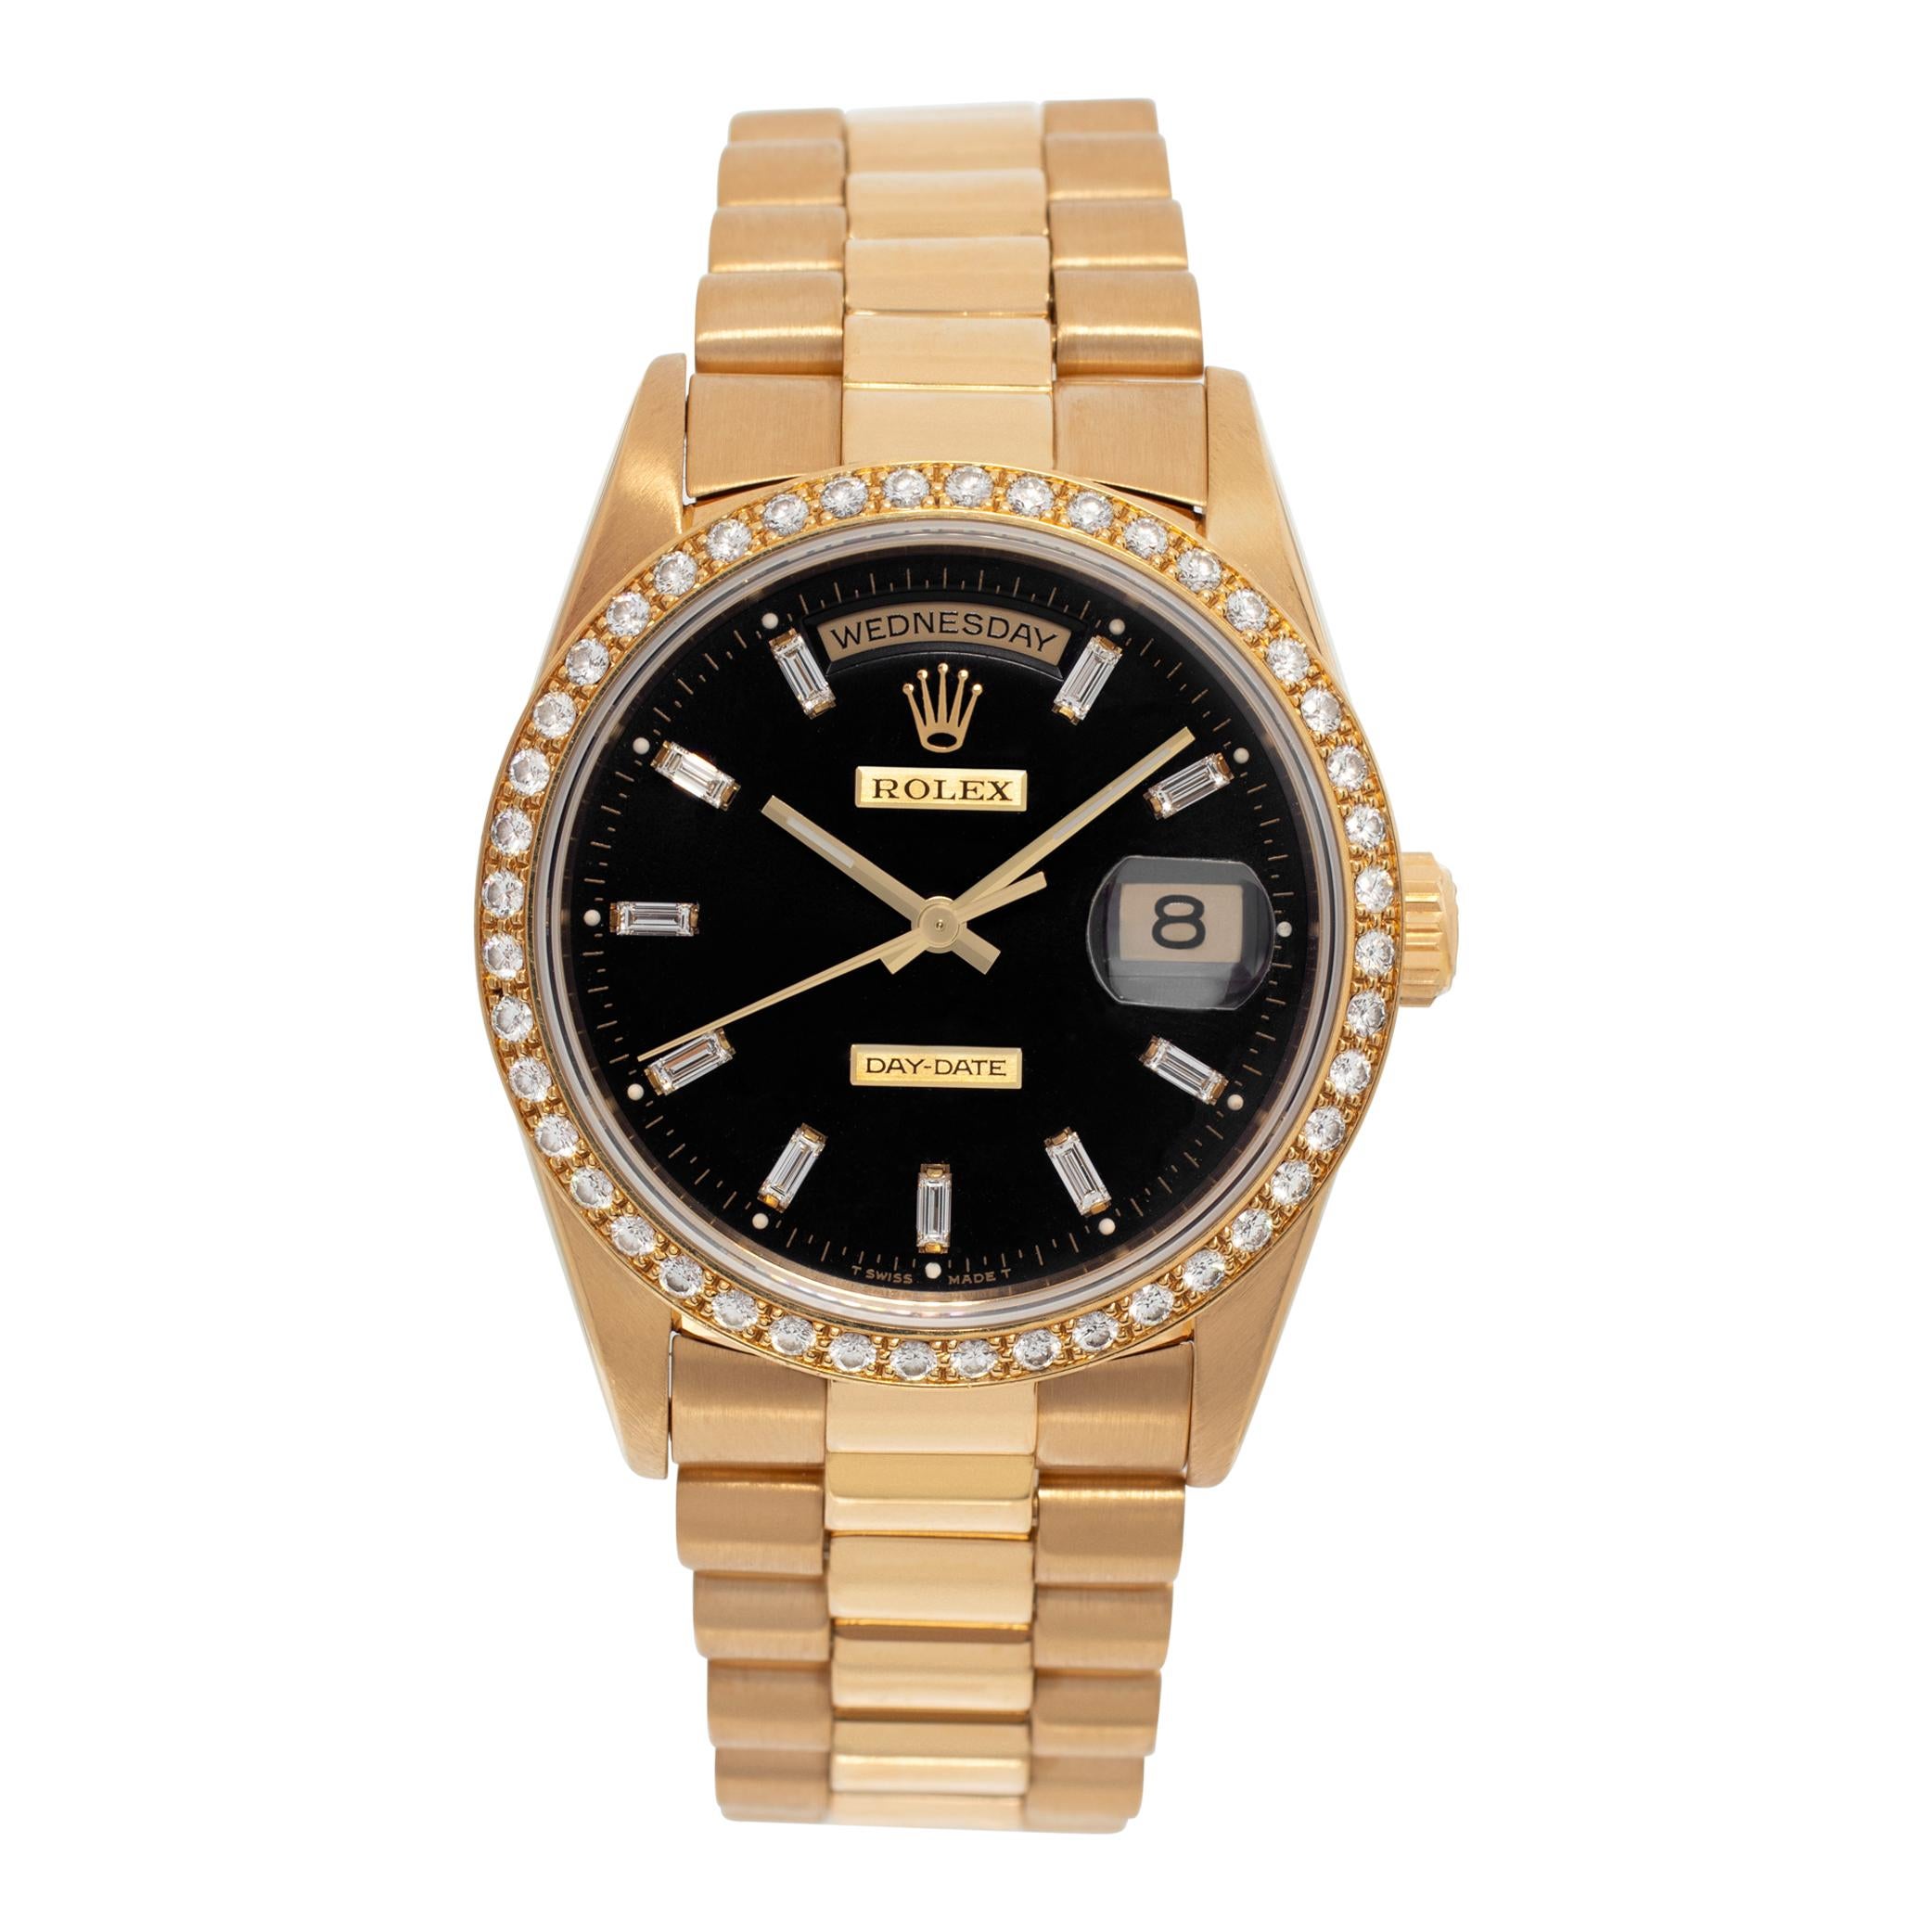 Rolex Day-Date 18k yellow gold Automatic Wristwatch Ref 18238 For Sale